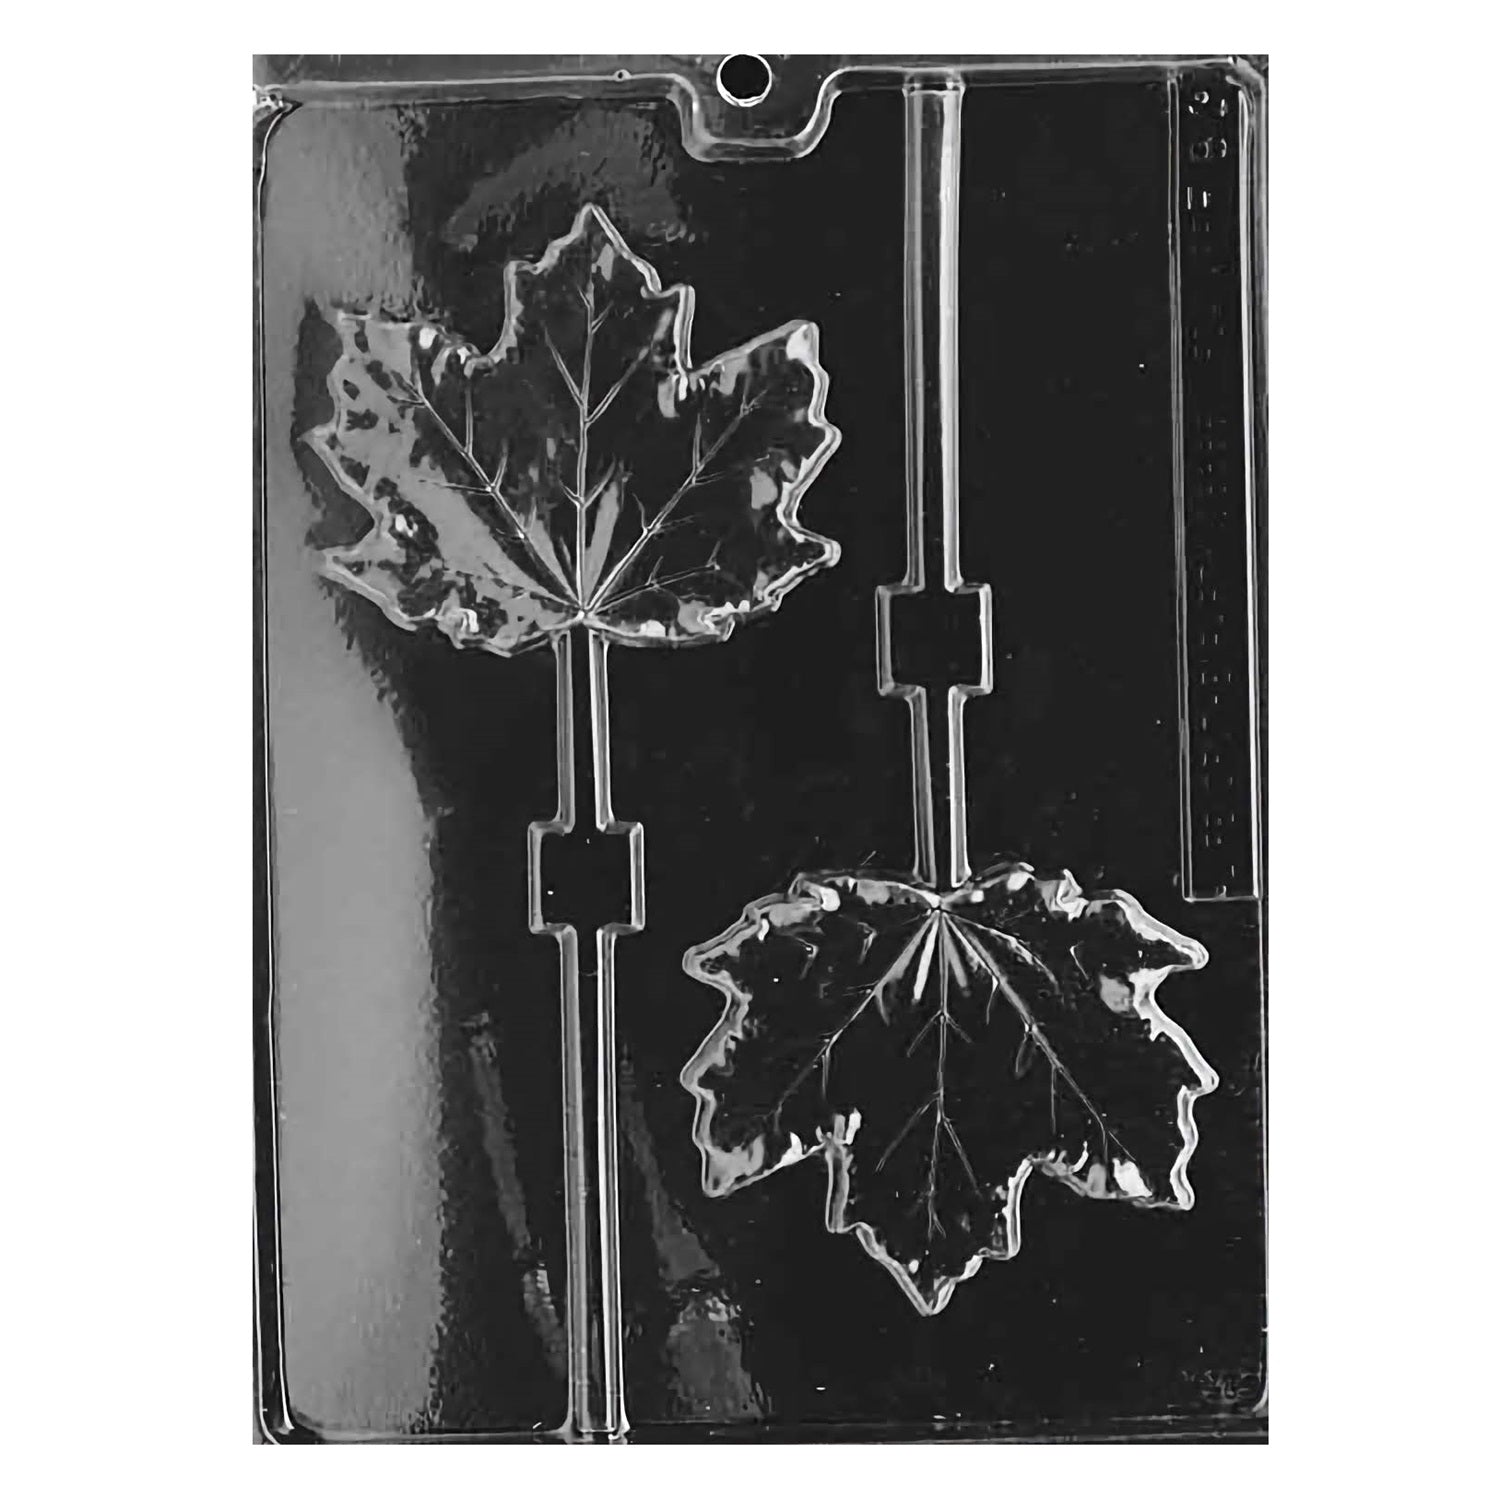 The image displays a clear plastic chocolate mold designed for creating maple leaf-shaped suckers. The mold features two large cavities, each intricately detailed to replicate the iconic, lobed leaves of a maple tree, complete with textured veins for added realism. Each leaf cavity is equipped with a slot for inserting a sucker stick.